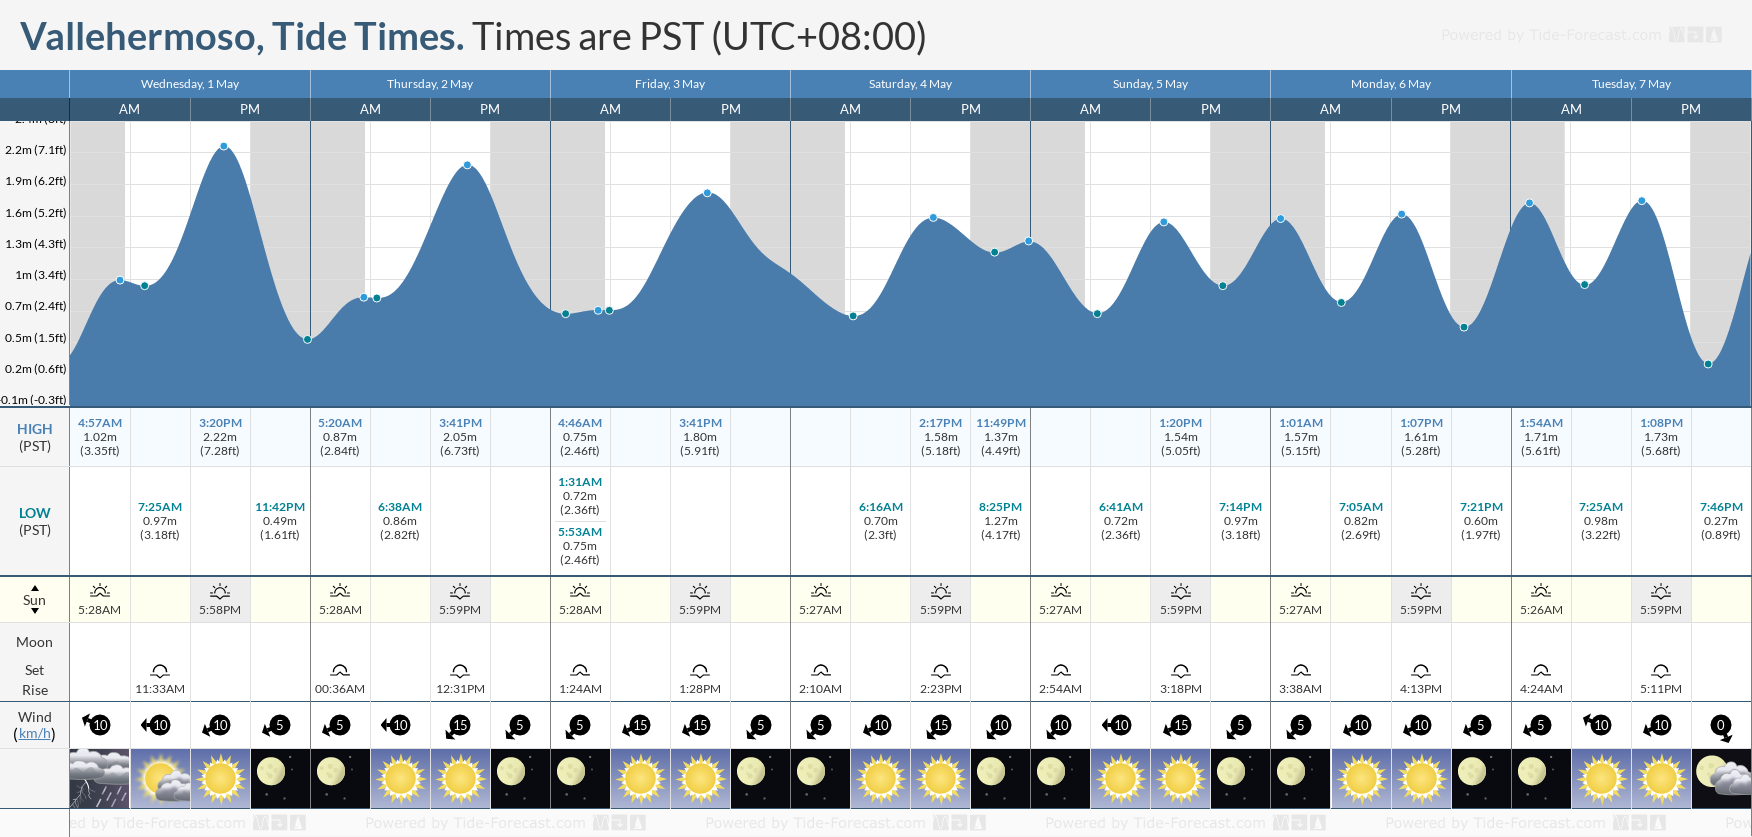 Vallehermoso Tide Chart including high and low tide tide times for the next 7 days